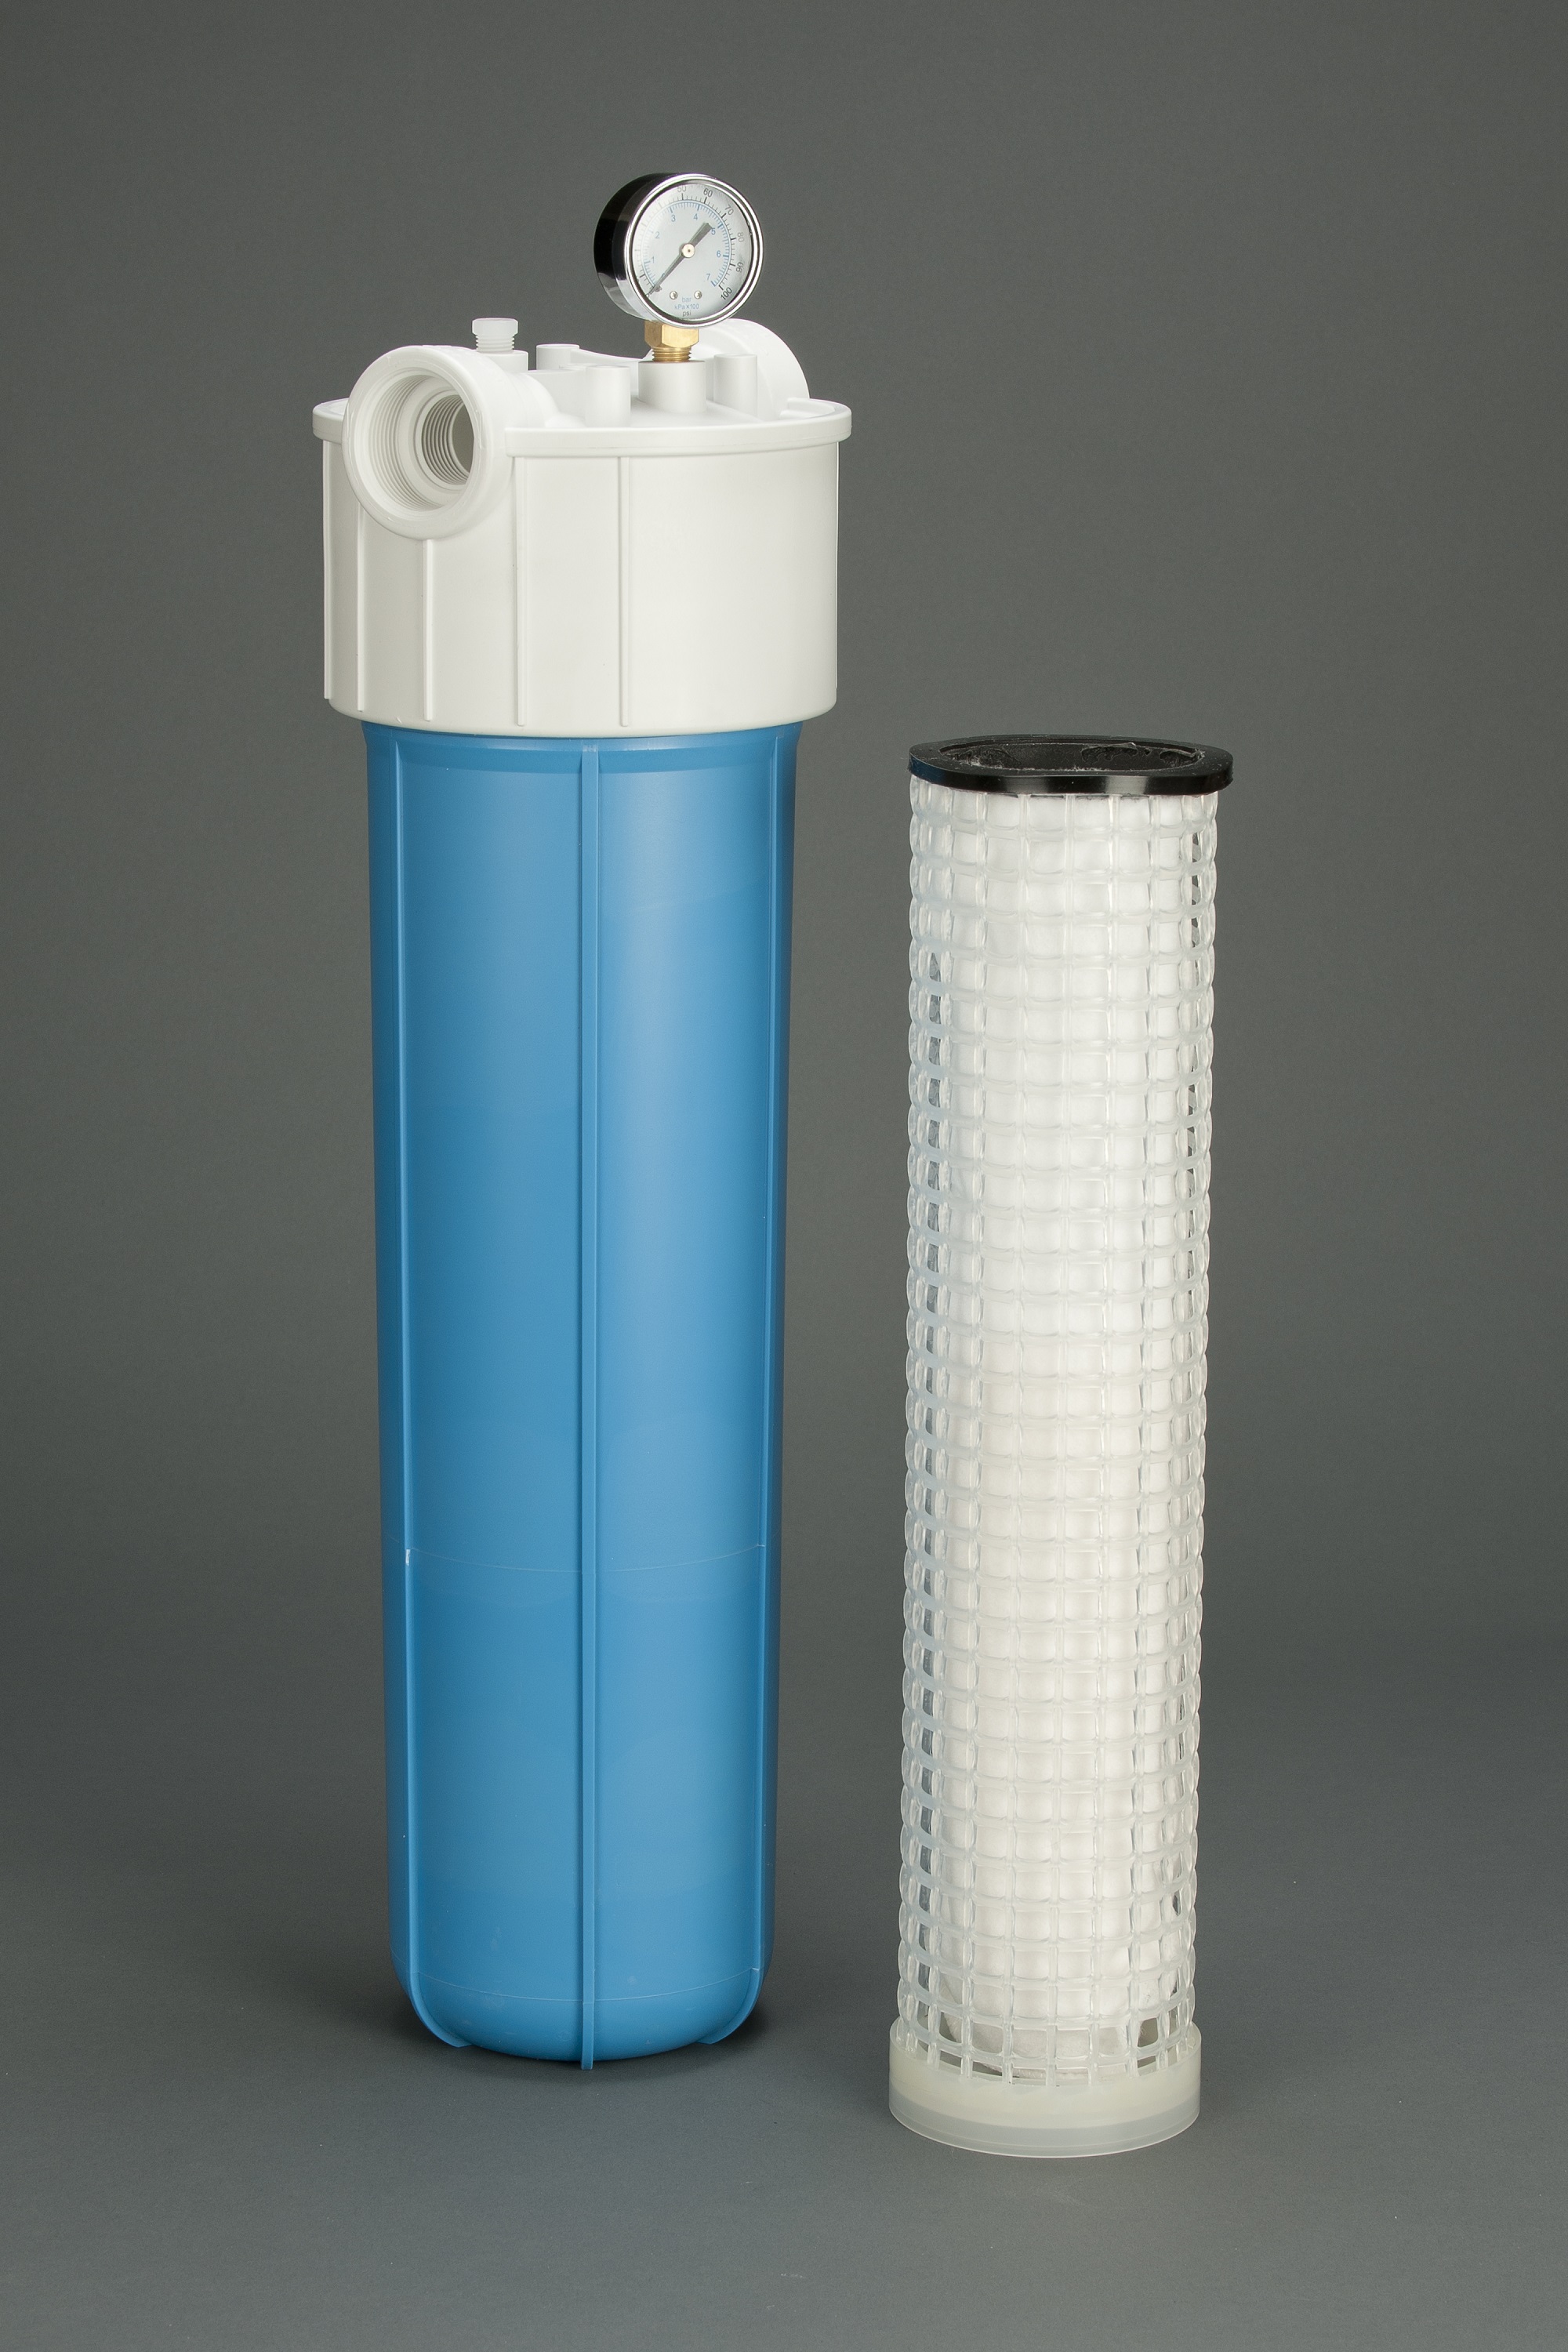 Porvair has added the GIANT bag filters and bag filter housings to its portfolio of standard filter products.